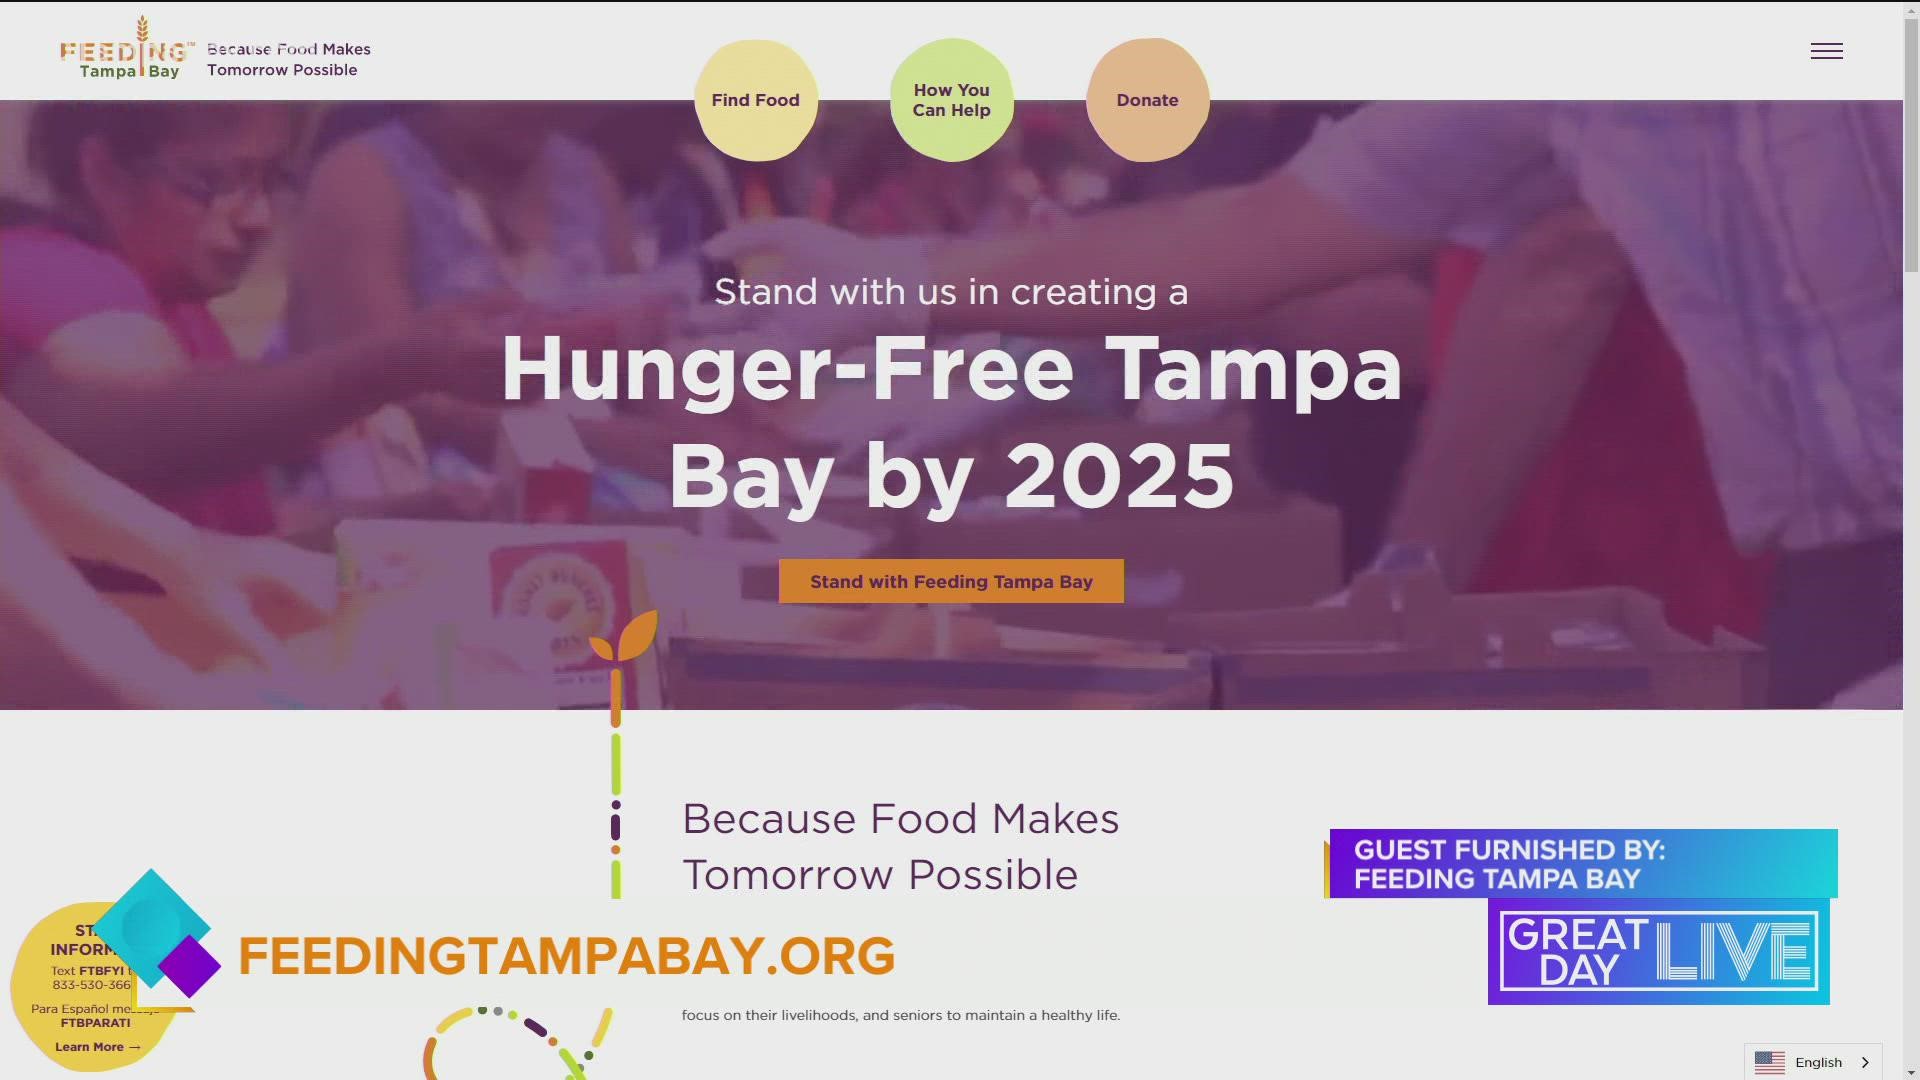 Feeding Tampa Bay spreads the message: “Come in for a meal, walk out with a future”